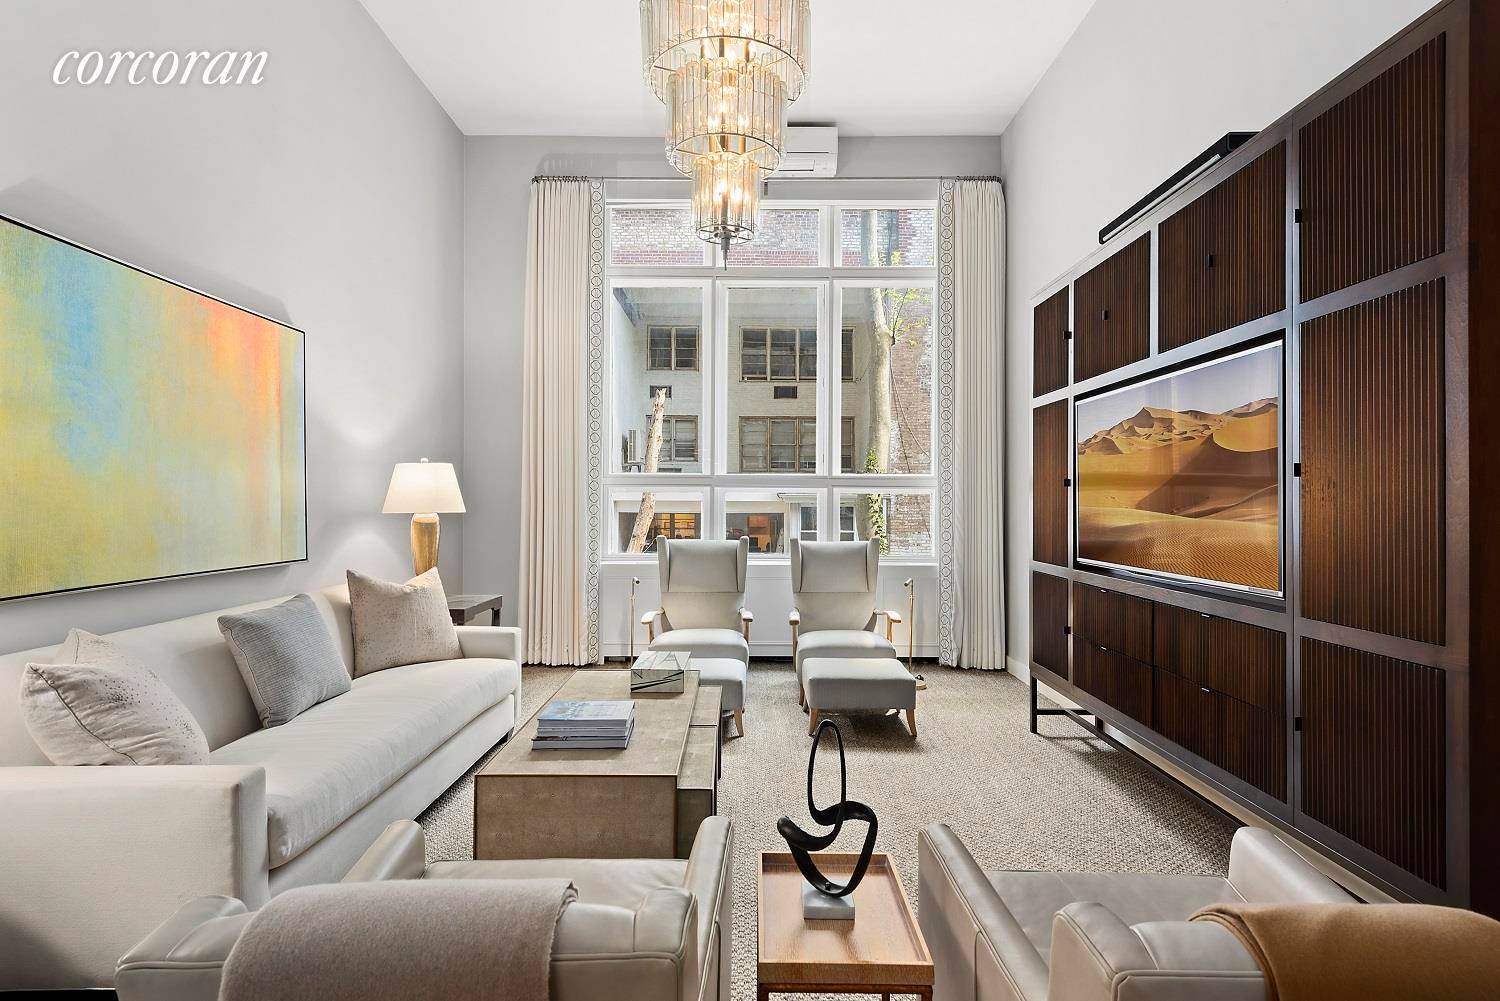 Exquisitely designed with classic but yet modern elegance no detail has been overlooked within this stunning West Village luxury furnished rental.